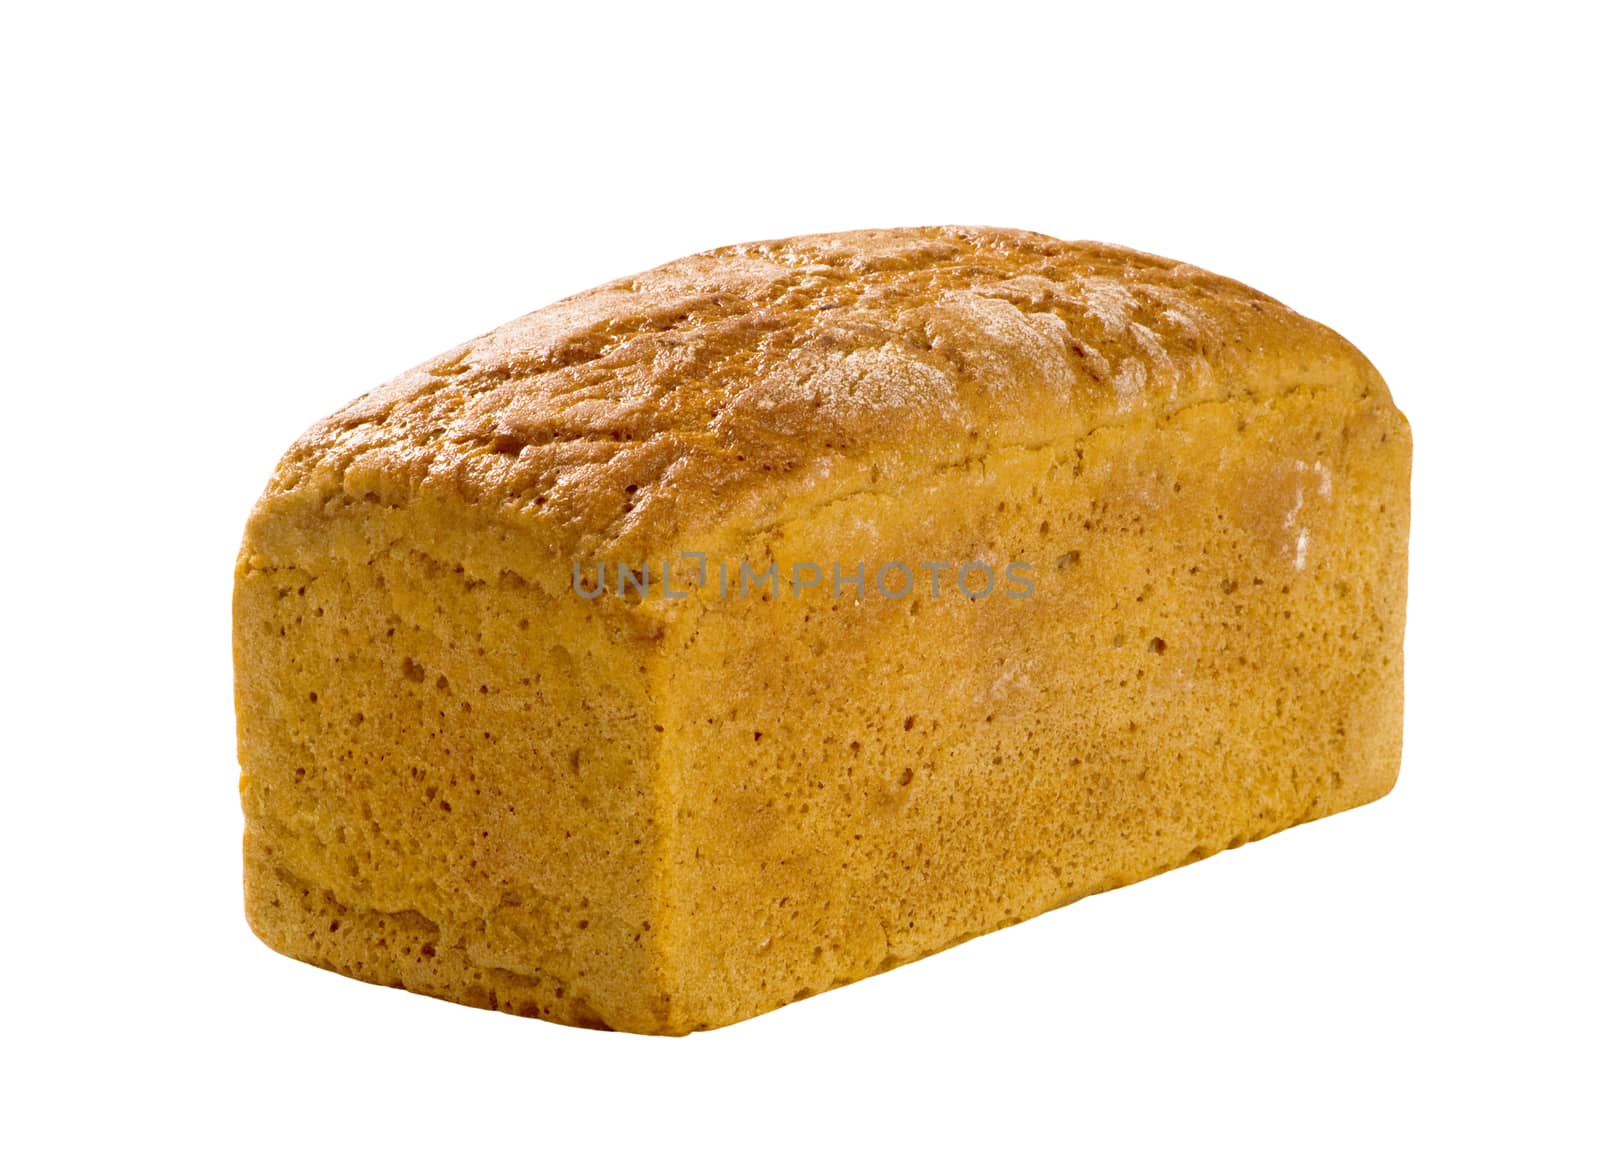 Loaf of brown bread isolated on white